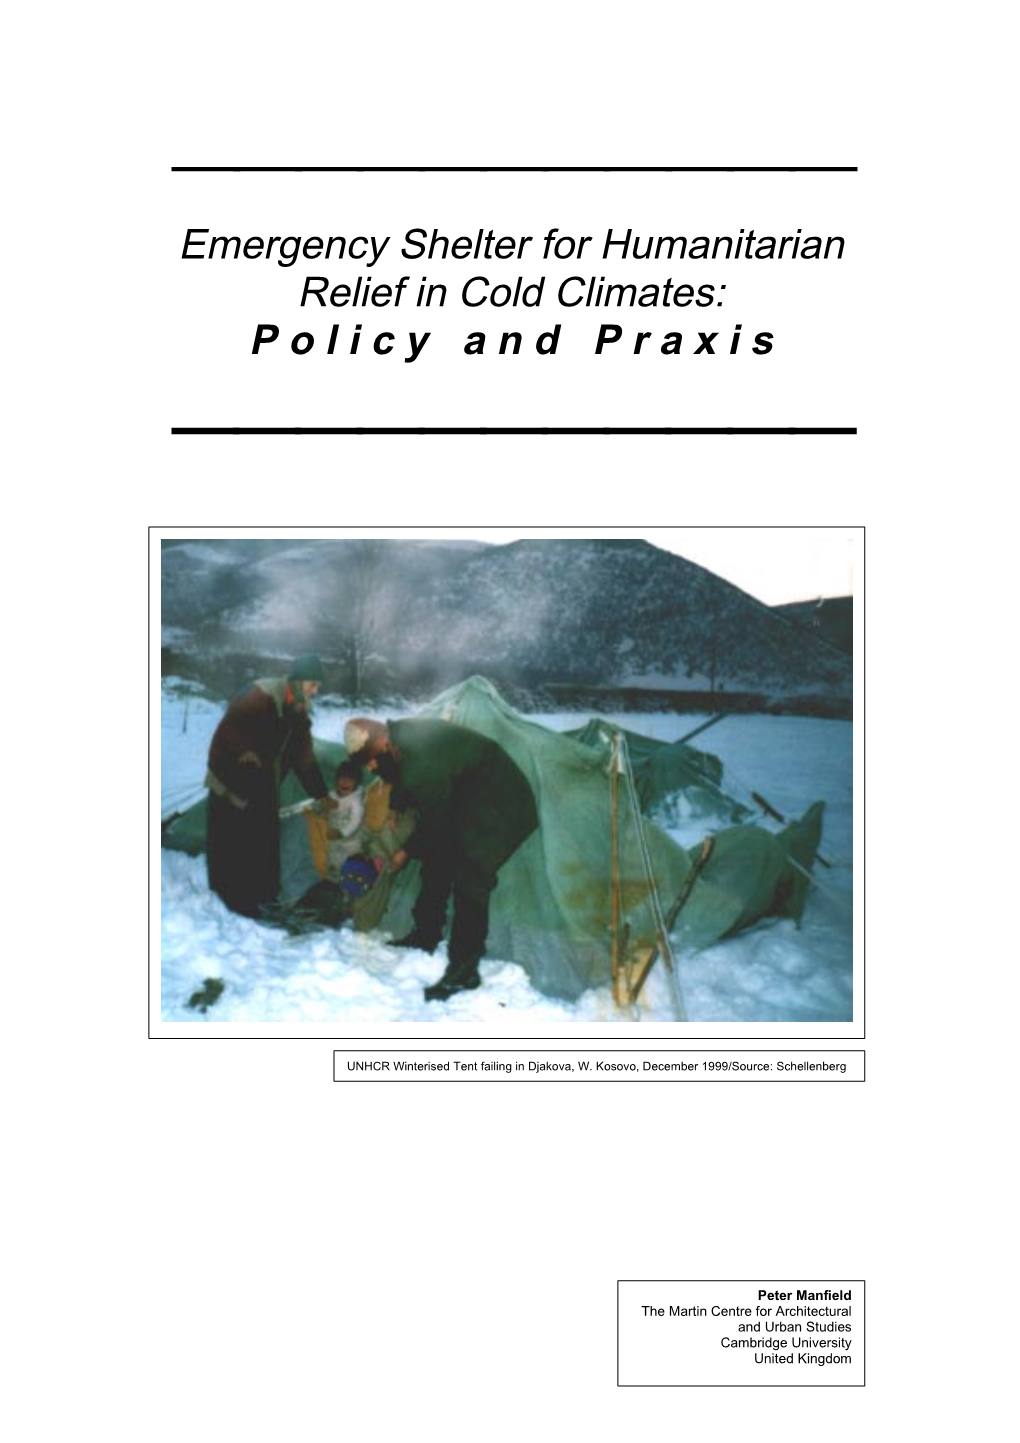 Emergency Shelter for Humanitarian Relief in Cold Climates: P O L I C Y a N D P R a X I S